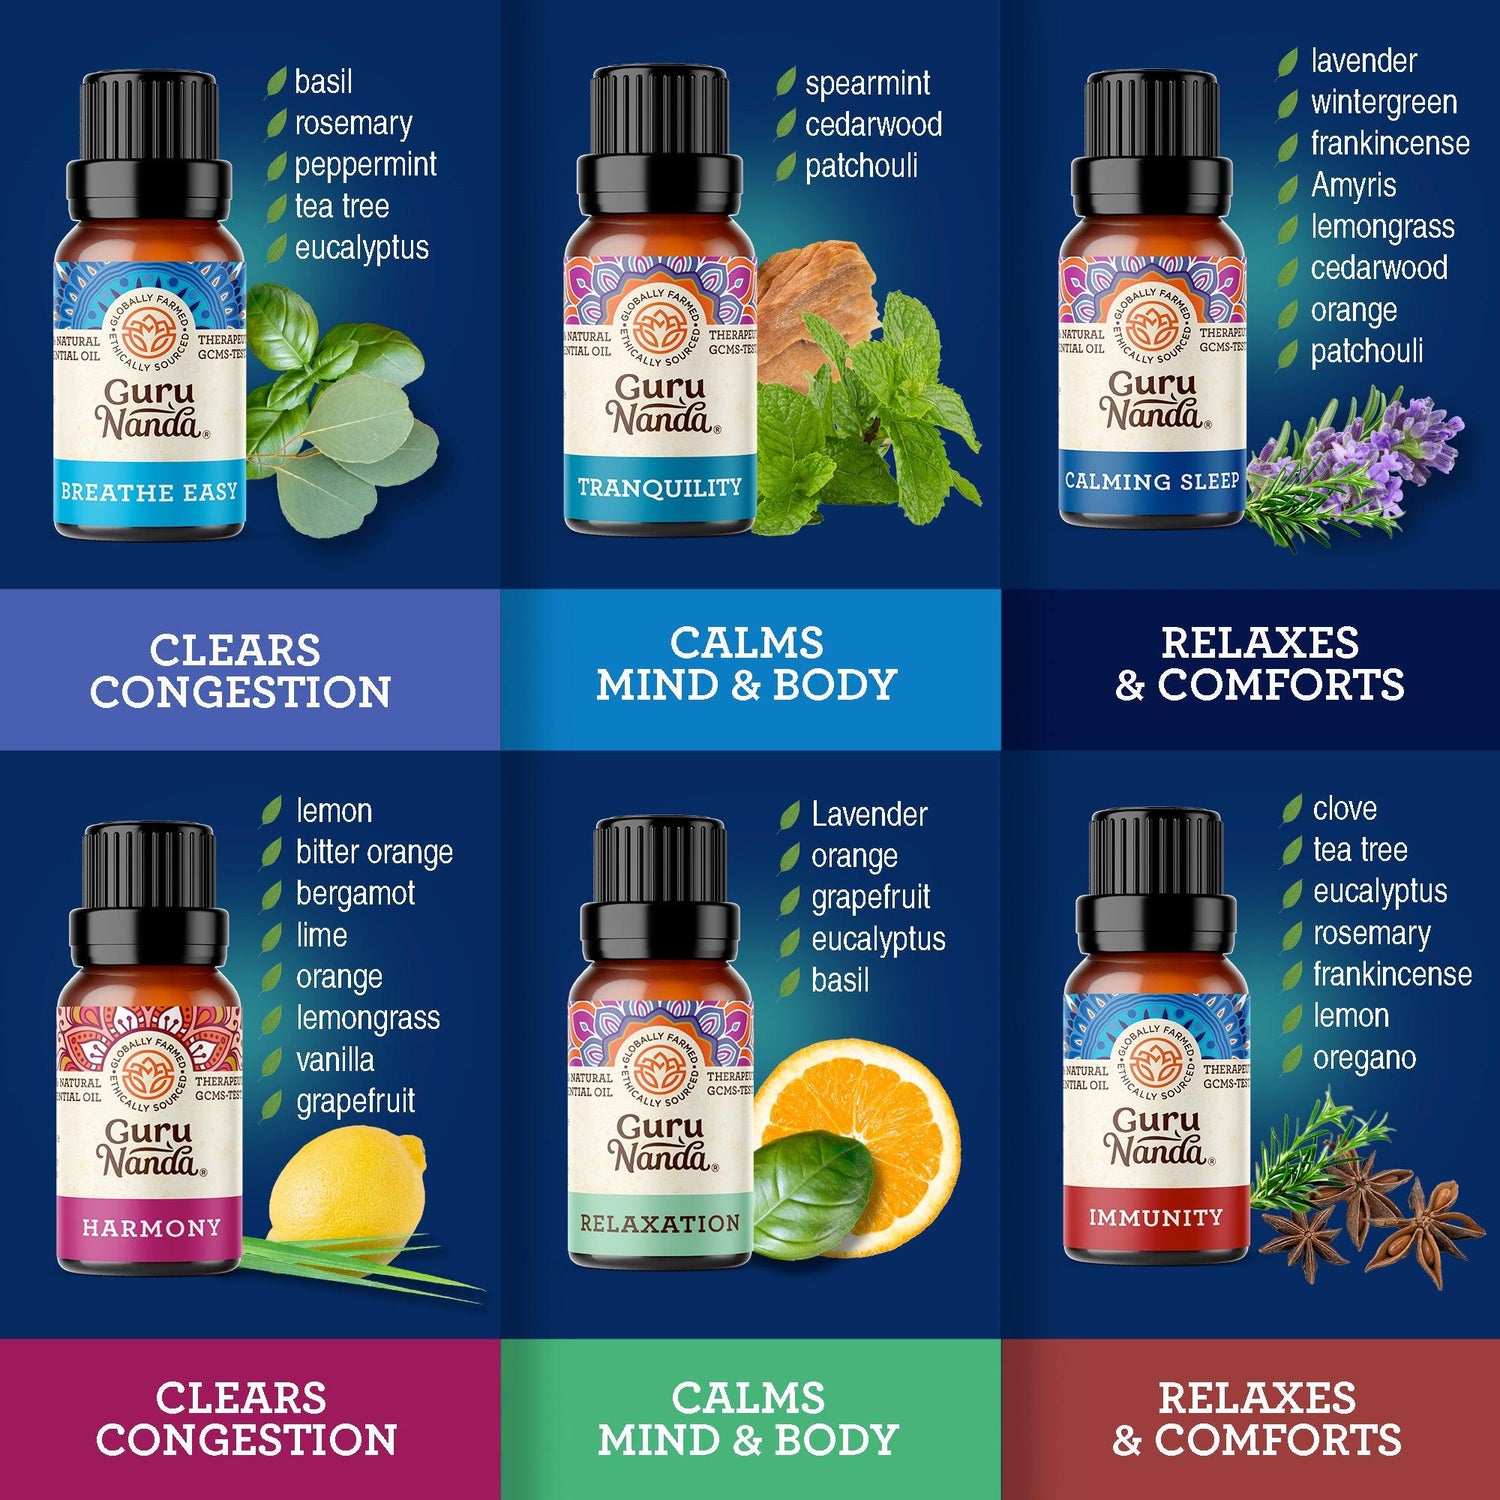 12 kind fruit flavour Pure Essential Oils for Diffuser, Humidifier